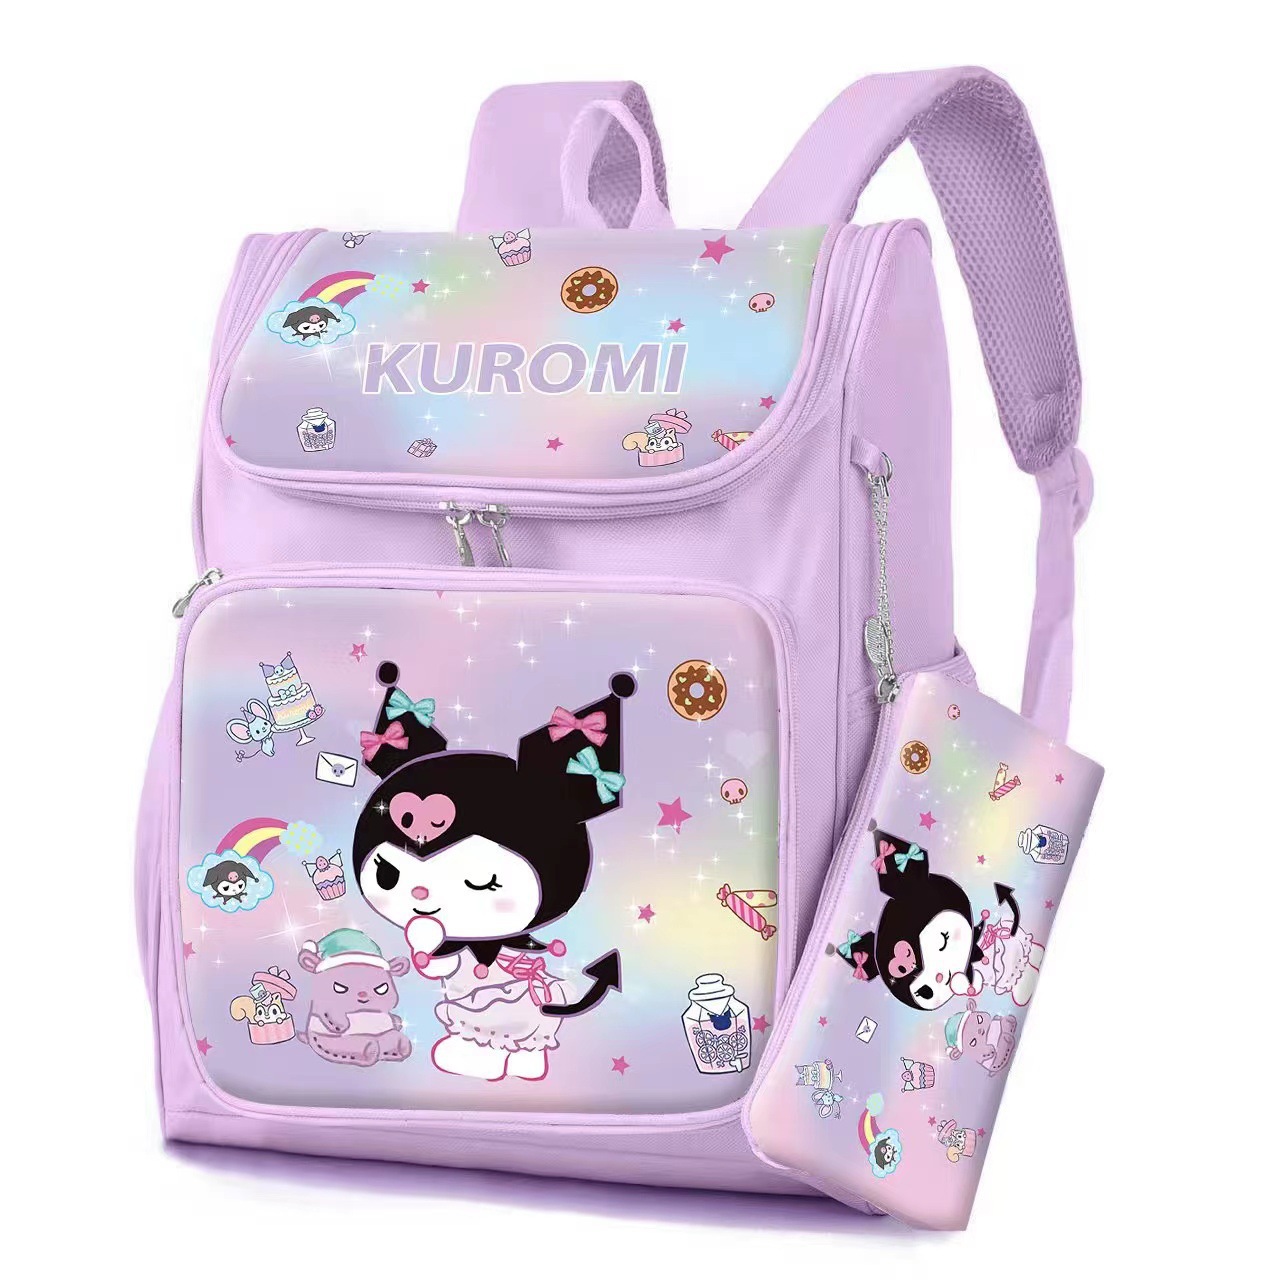 Clow M White Gradient Color Cartoon Cloth Medium and Large Student Backpack Large Capacity with Pencil Case Burden Reduction Schoolbag